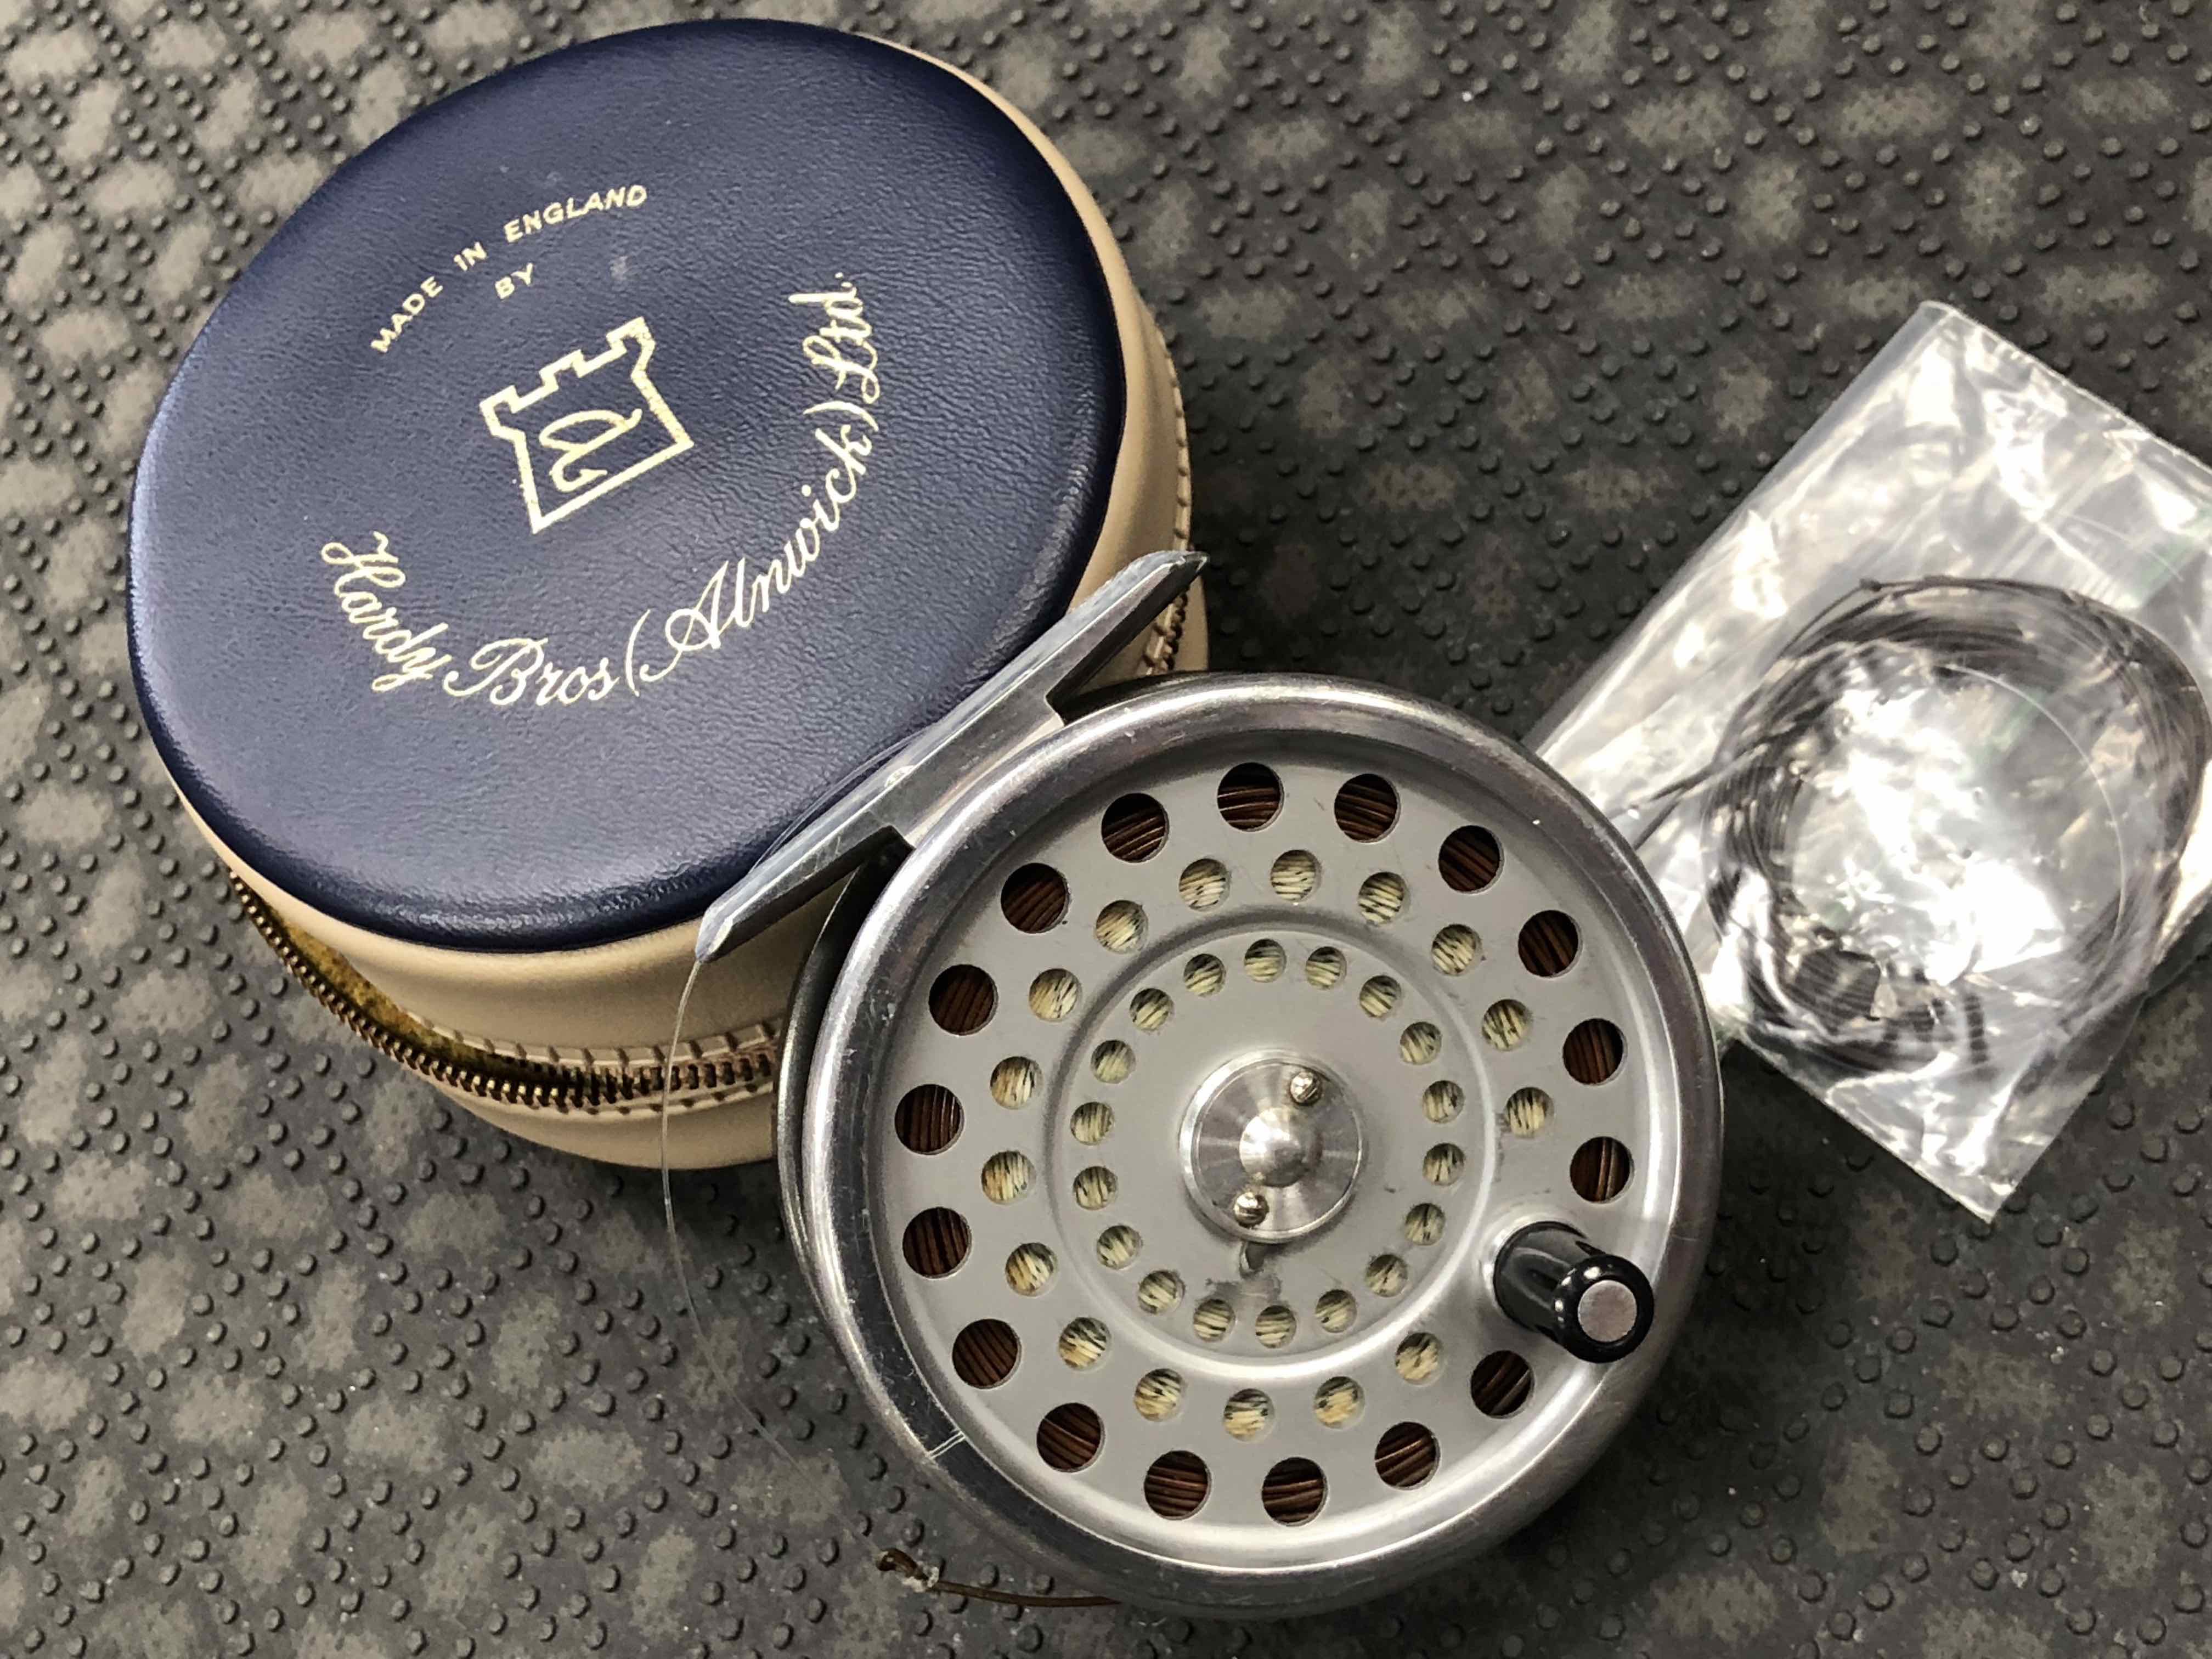 Hardy Fly Reel - Made in England - Marquis #7 c/w Zippered Vinyl Case, WF6S & Sink Leader - GOOD CONDITION! - $180